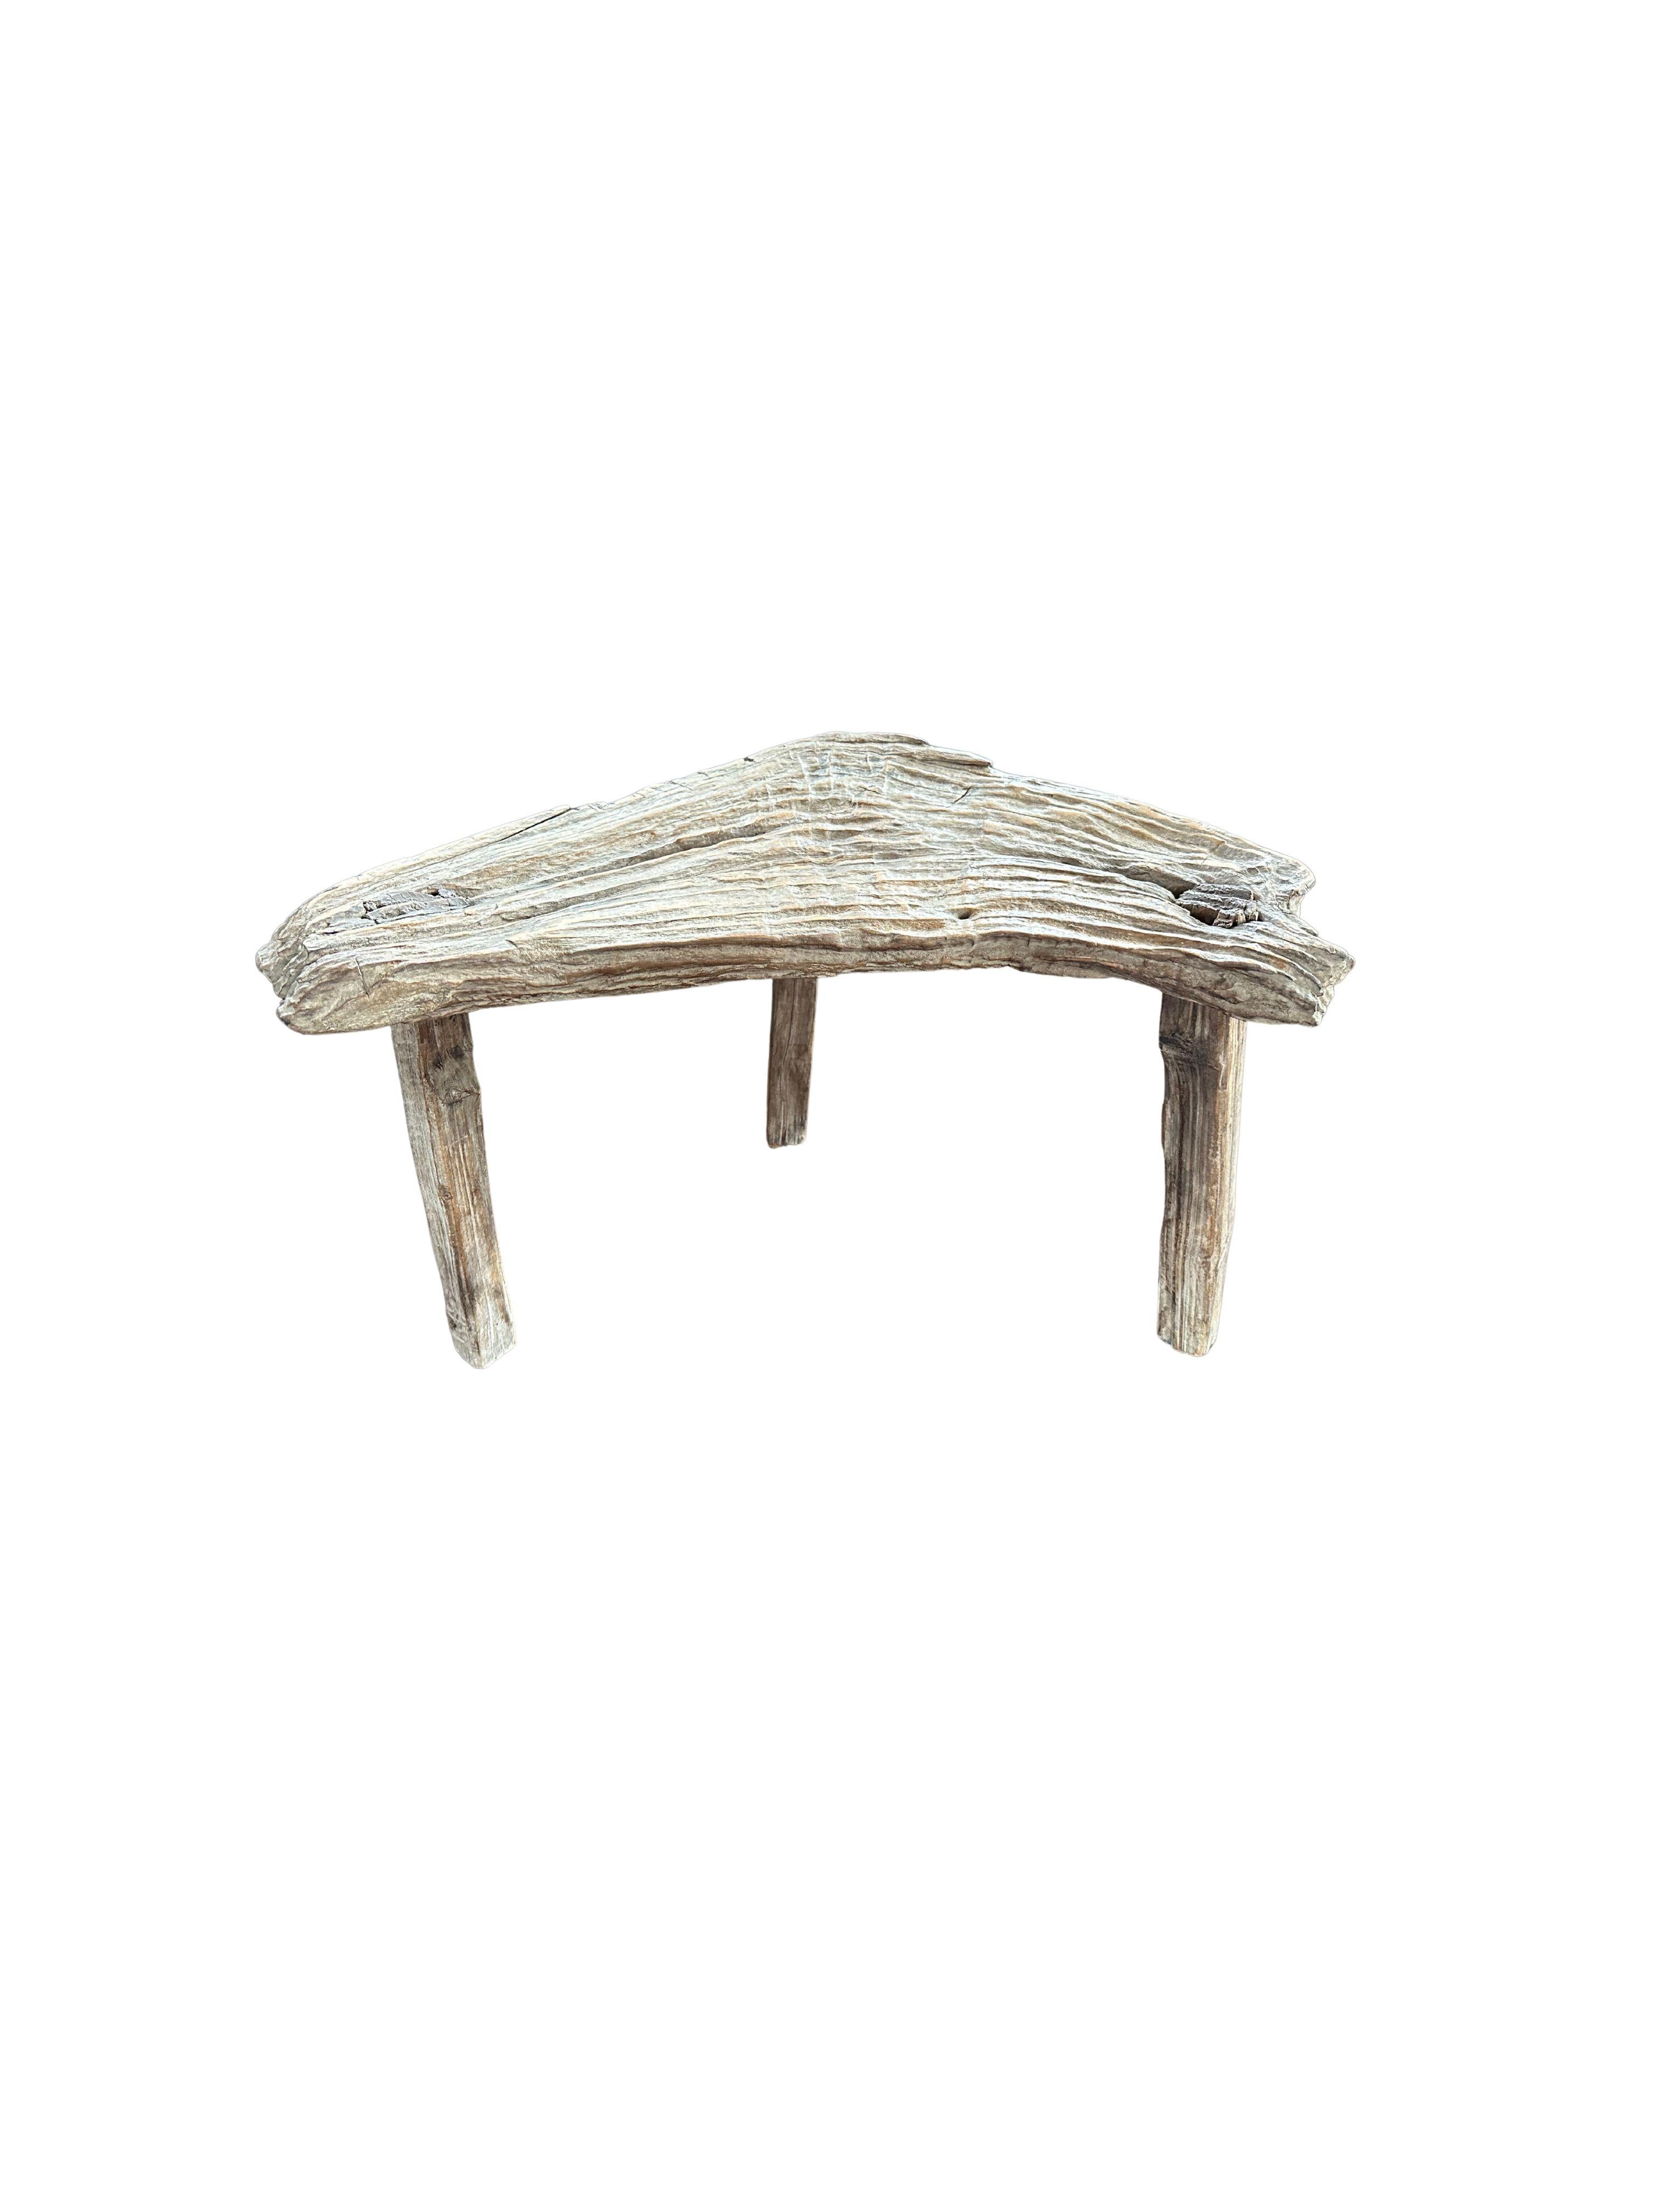 A wonderfully organic and sculptural stool. Carved from teak wood, this stool features wonderful contours and wood textures. This chair was sourced from bojonegoro on the island of Java. A unique object to bring warmth to any space. The age-related